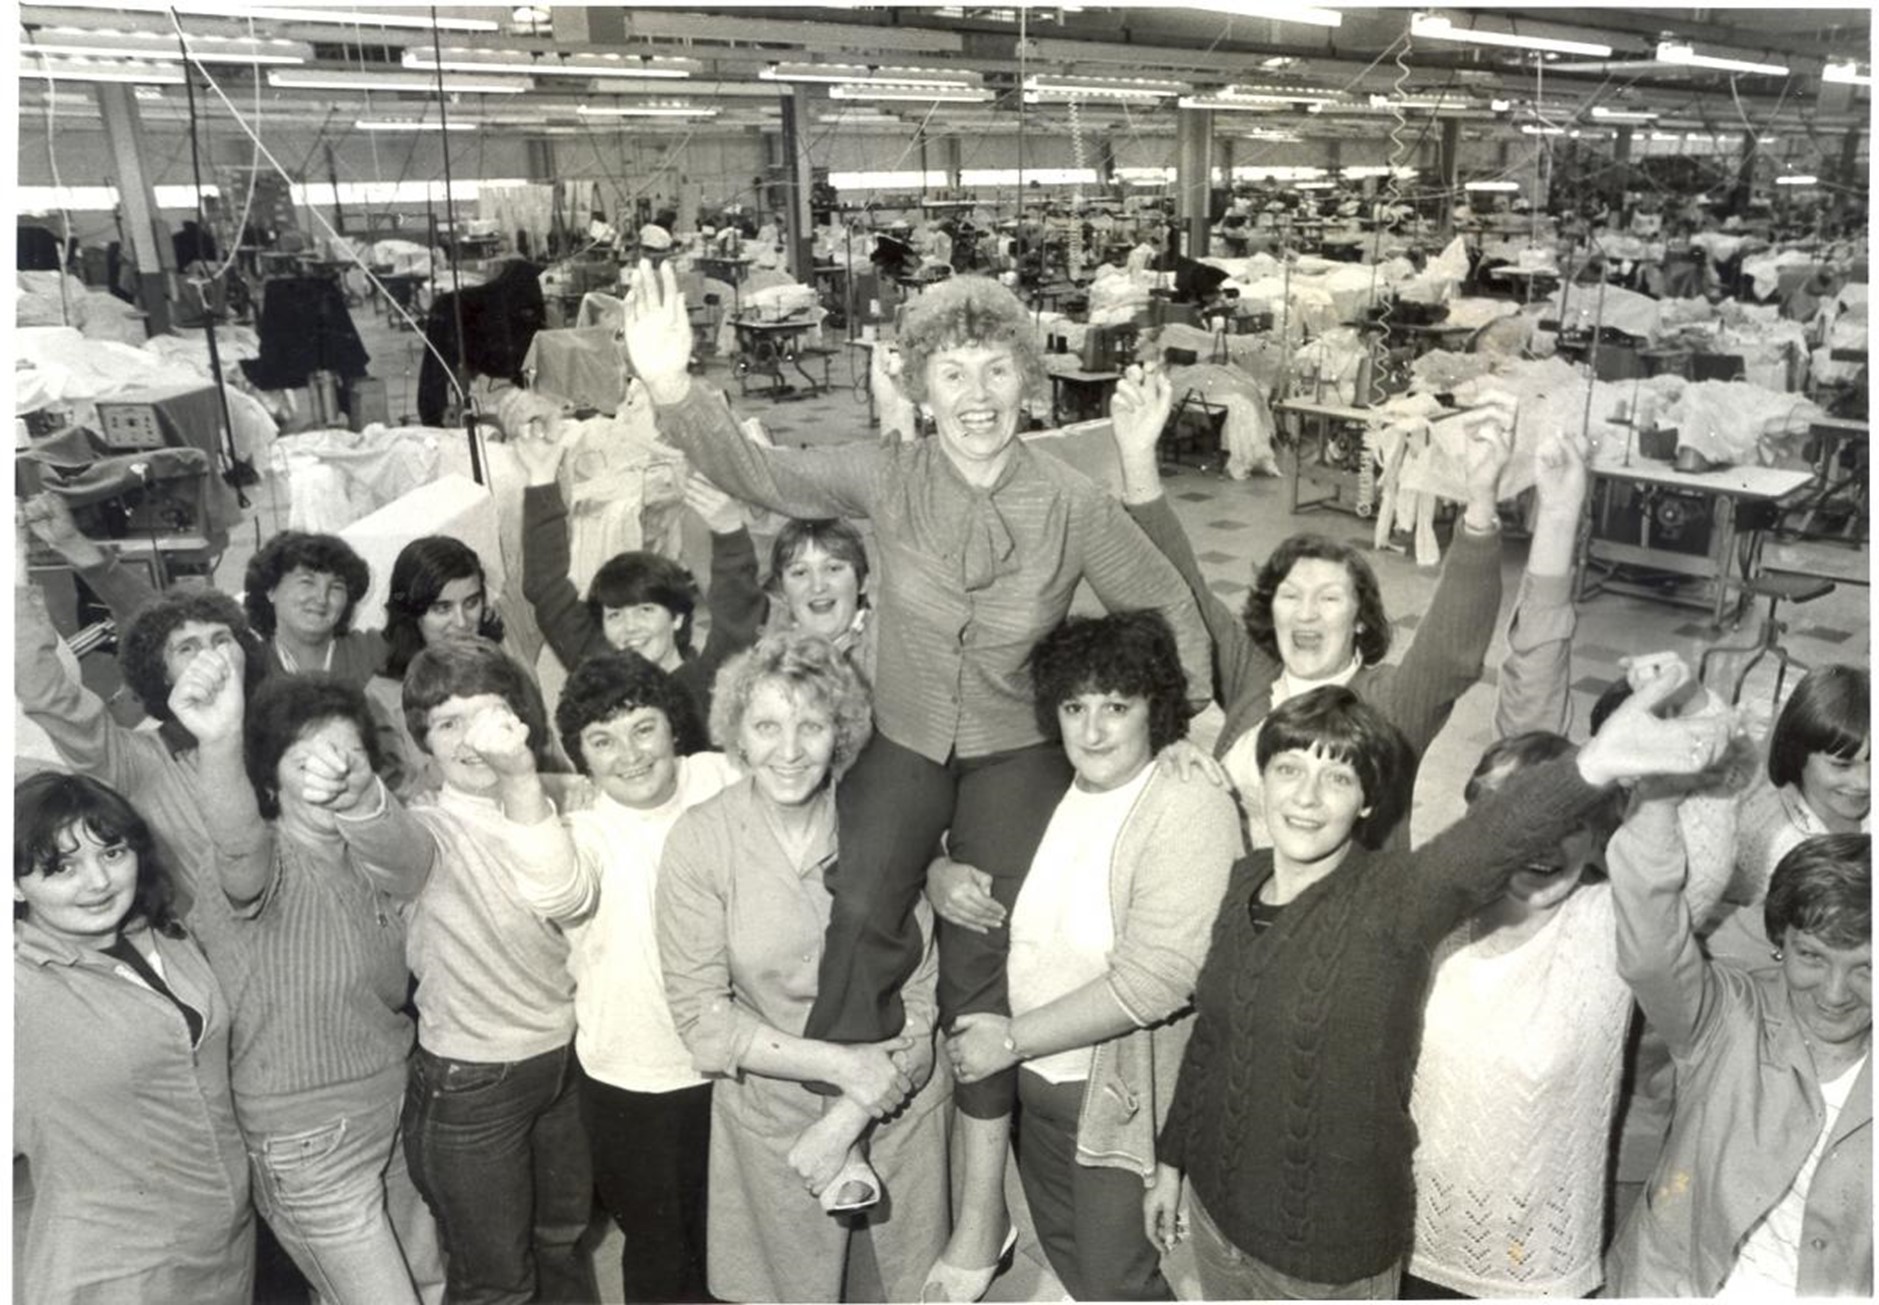 With victory secured, Lee Jeans workers hold shop steward Helen Monaghan aloft in celebration, August 1981.